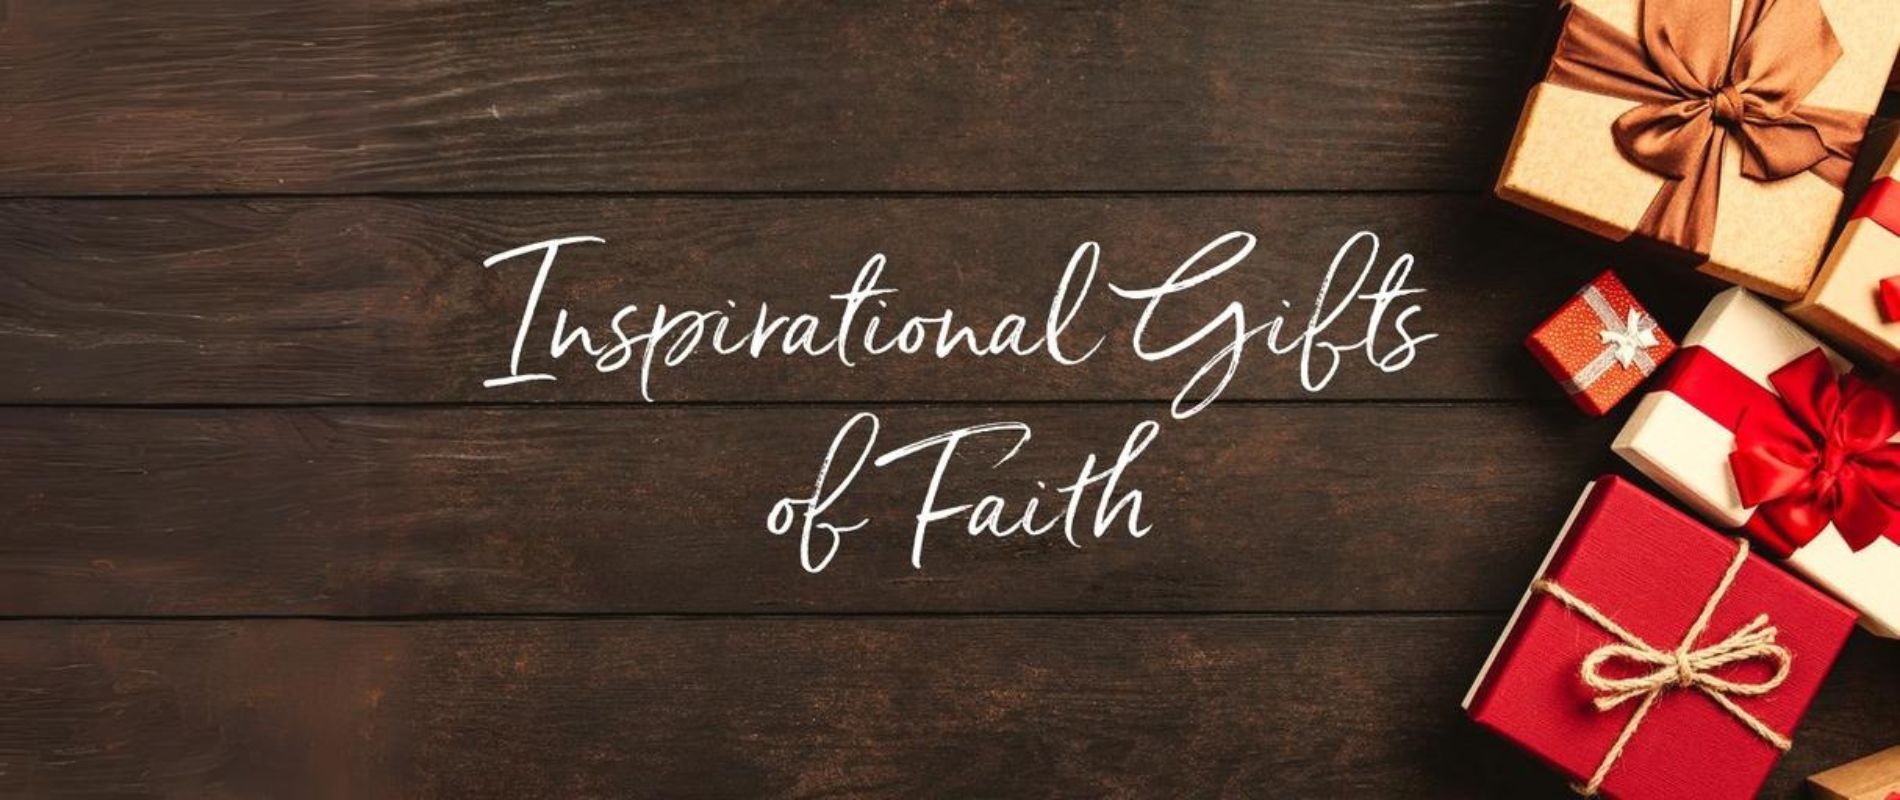 FAITH INSPIRED GIFTS